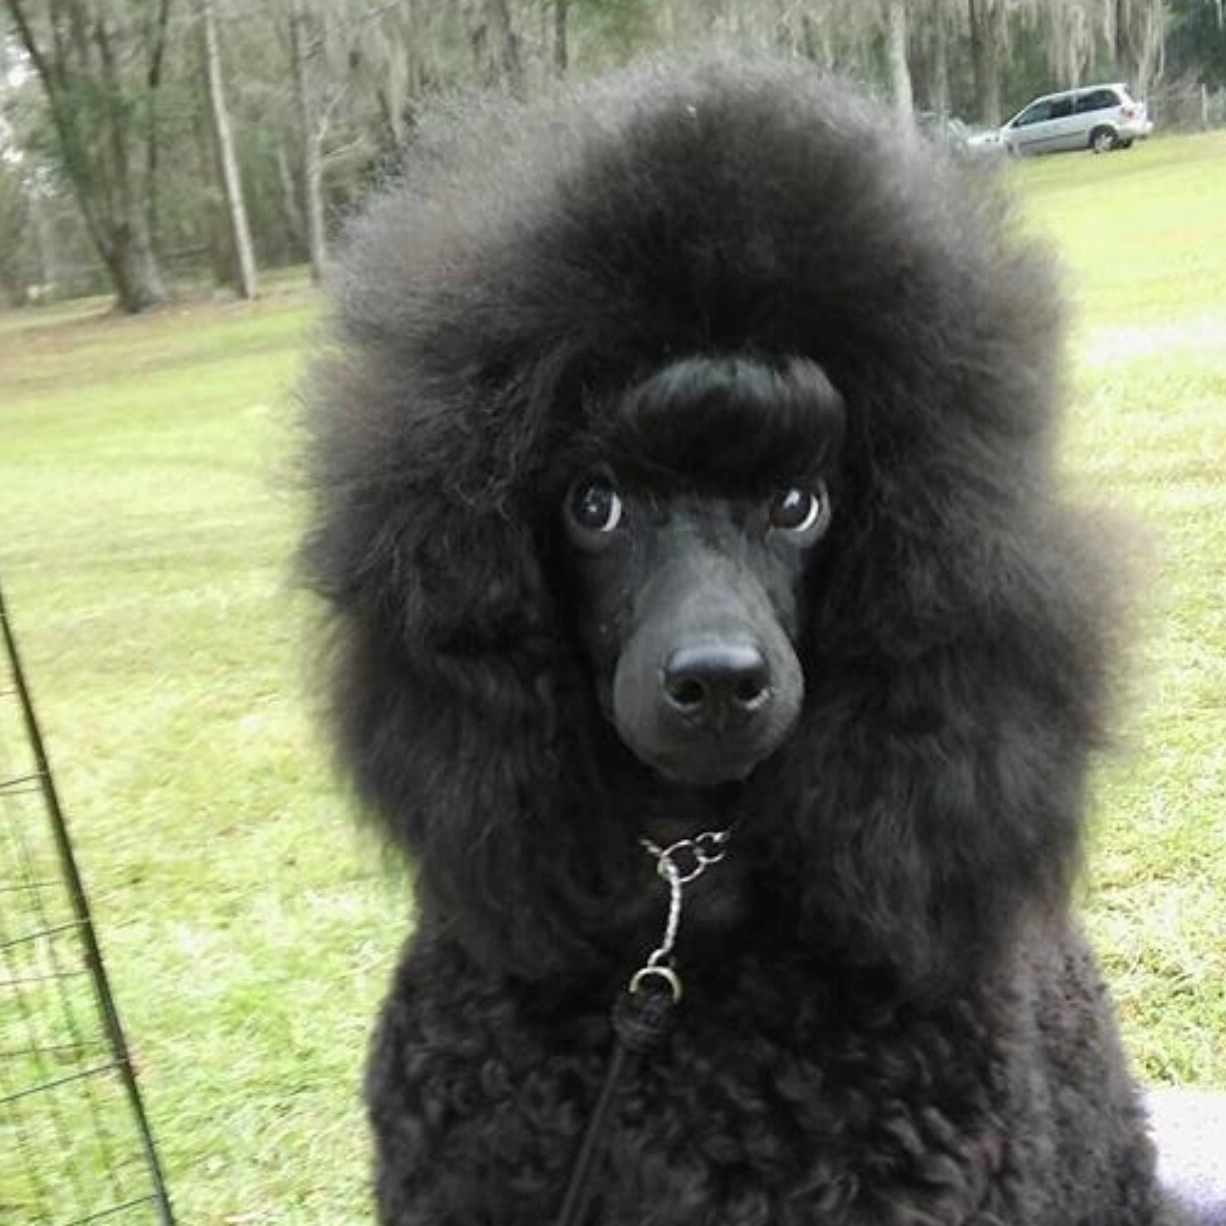 Black Poodle with Puppy Show Trim showing off the eyes after being groomed with Andis tools.